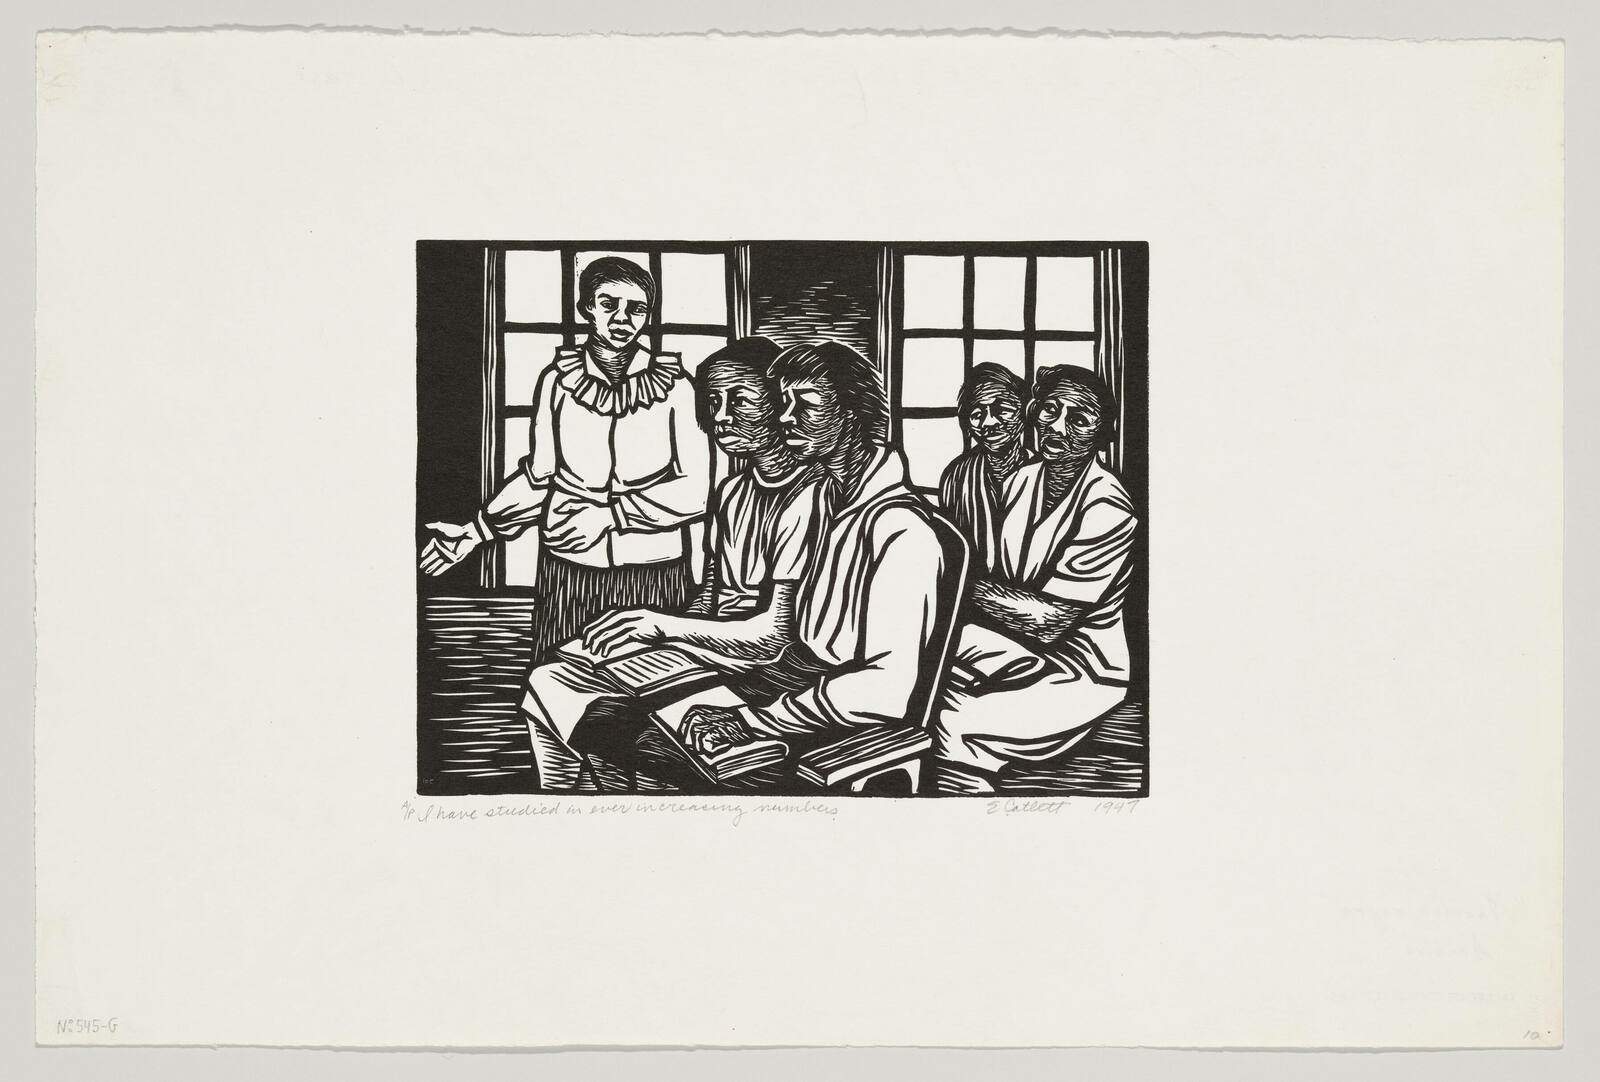 Four Black women sitting in a classroom with books on their laps while a standing woman lectures.